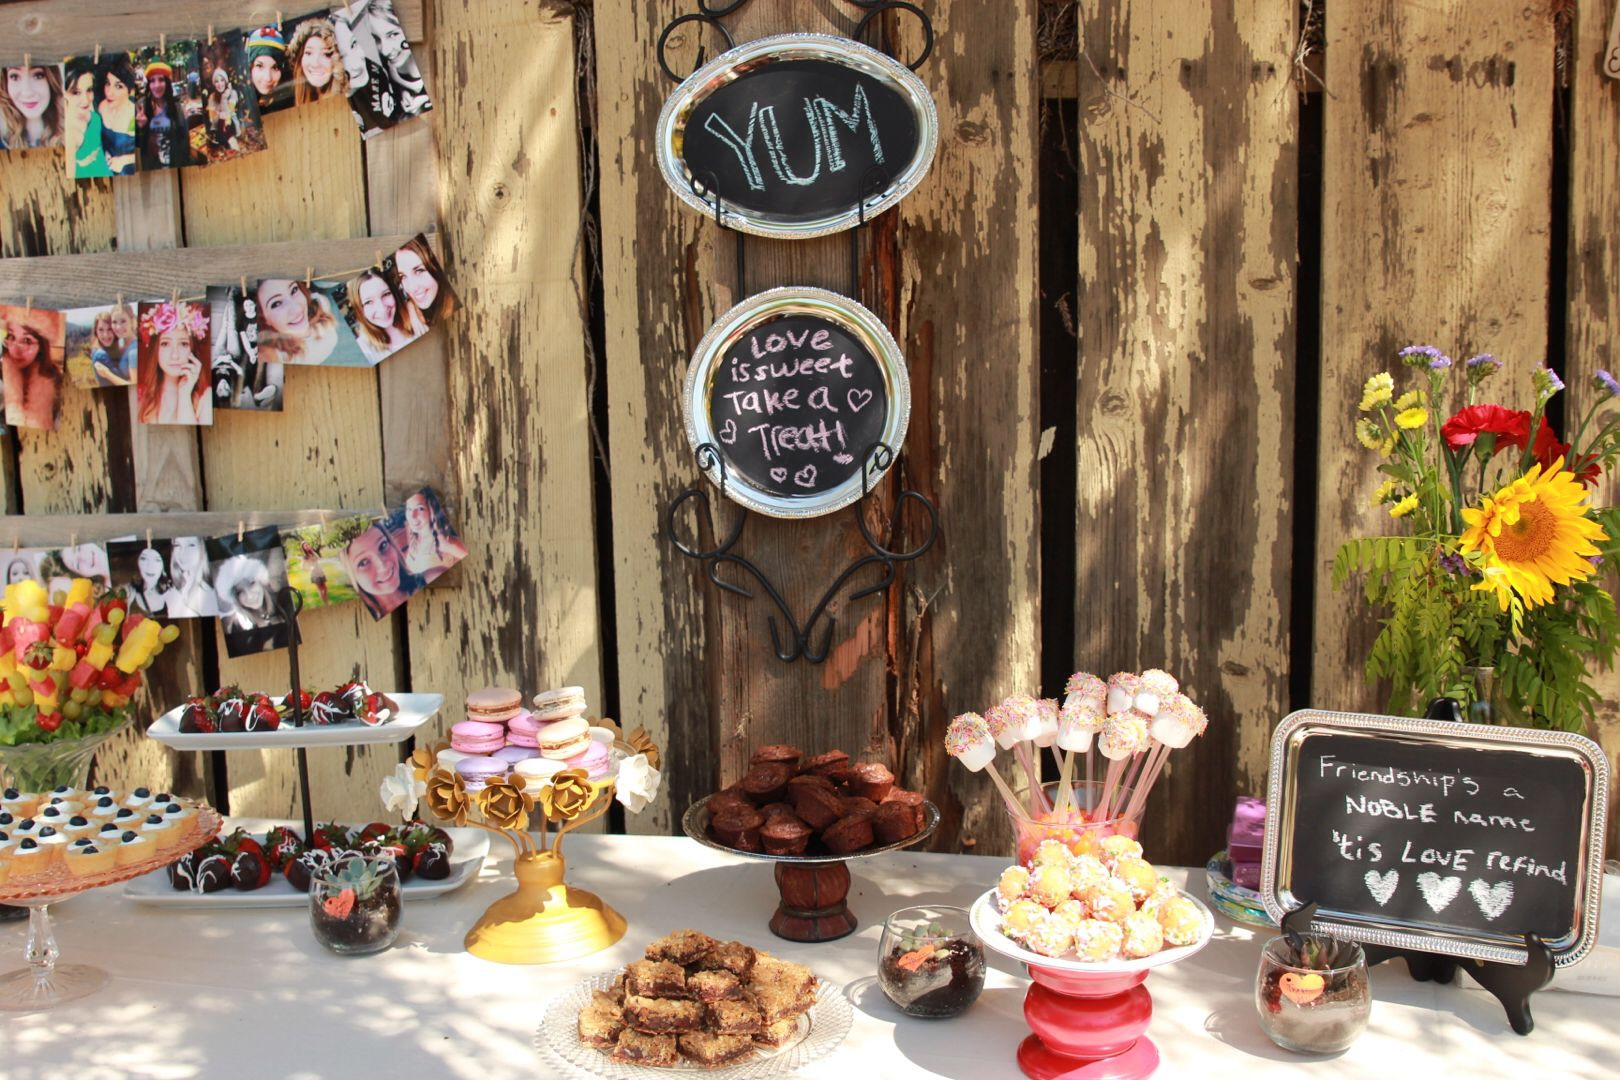 Backyard Party Ideas For Sweet 16
 Perfect for a rustic and vintage sweet 16